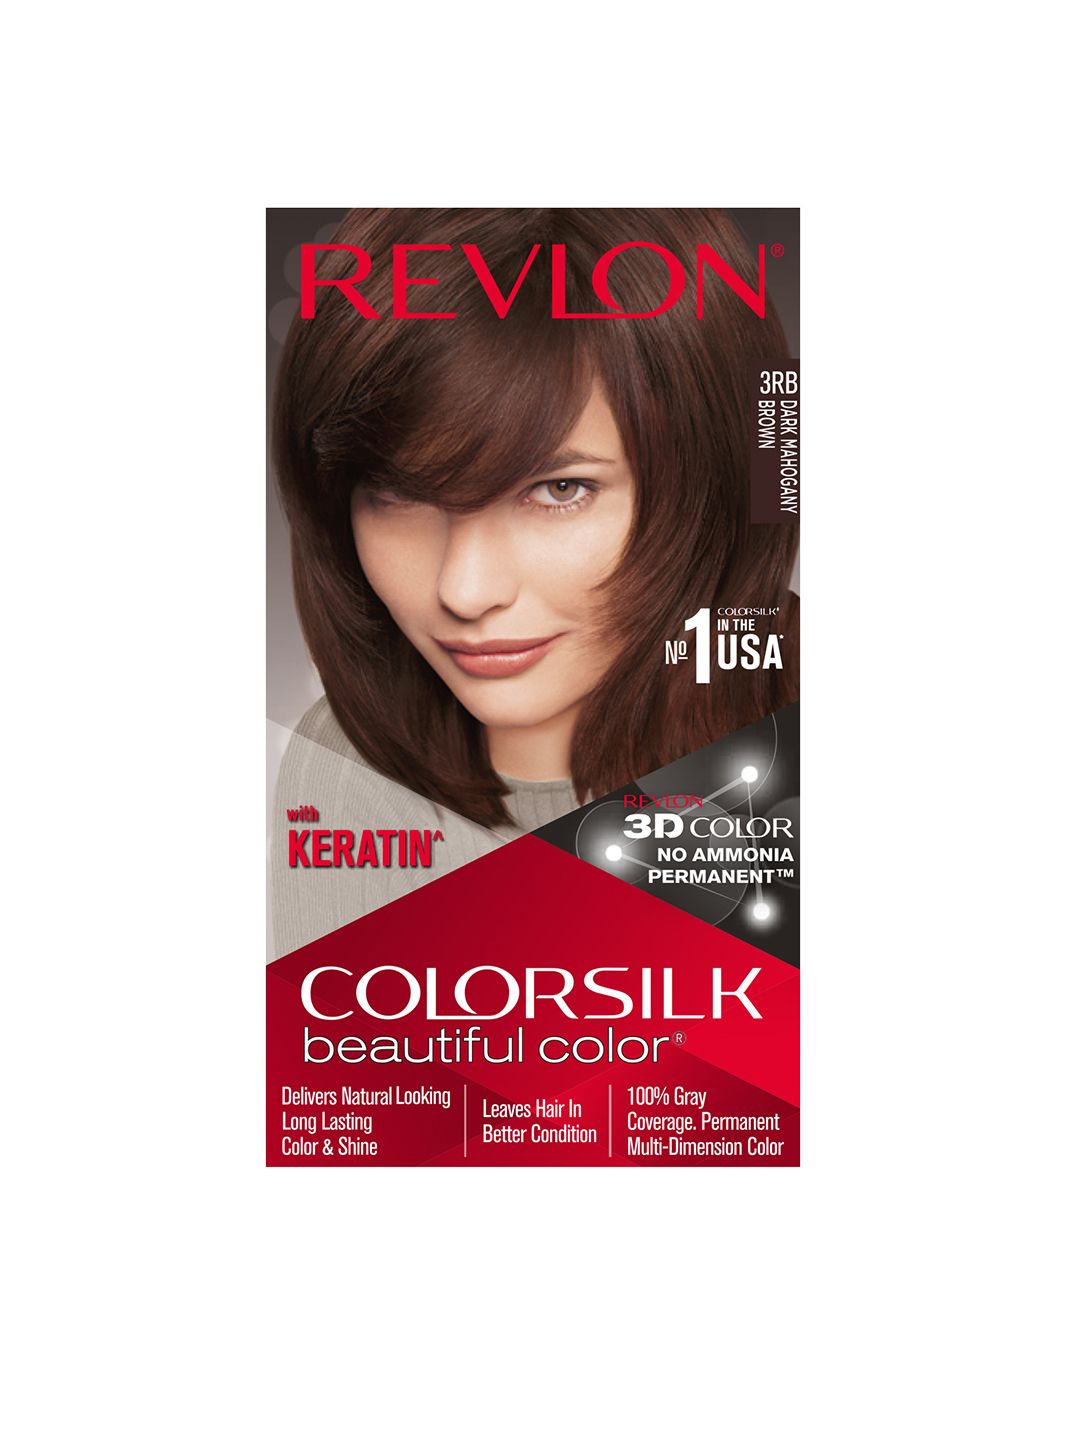 Revlon Color Silk Hair Color with Keratin - Dark Mahogany Brown 3RB Price in India